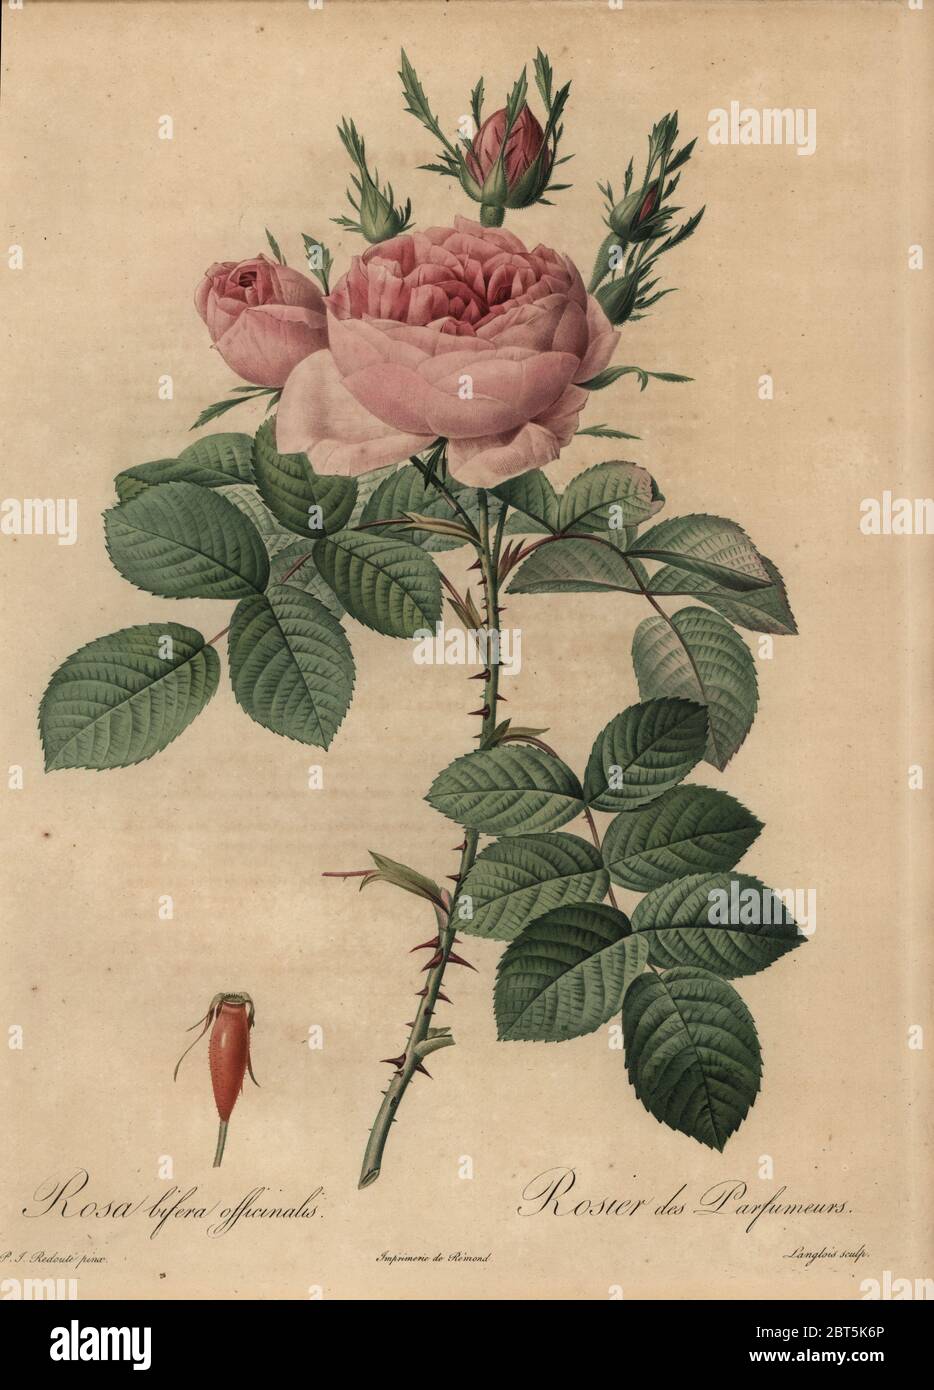 Pink hybrid rose, Rosa bifera officinalis, Rosier des Parfumeurs, Rosier damascene d'Autumne. Stipple copperplate engraving by Pierre Gabriel Langlois handcoloured a la poupee after a botanical illustration by Pierre-Joseph Redoute from the first folio edition of Les Roses, Firmin Didot, Paris, 1817. Stock Photo